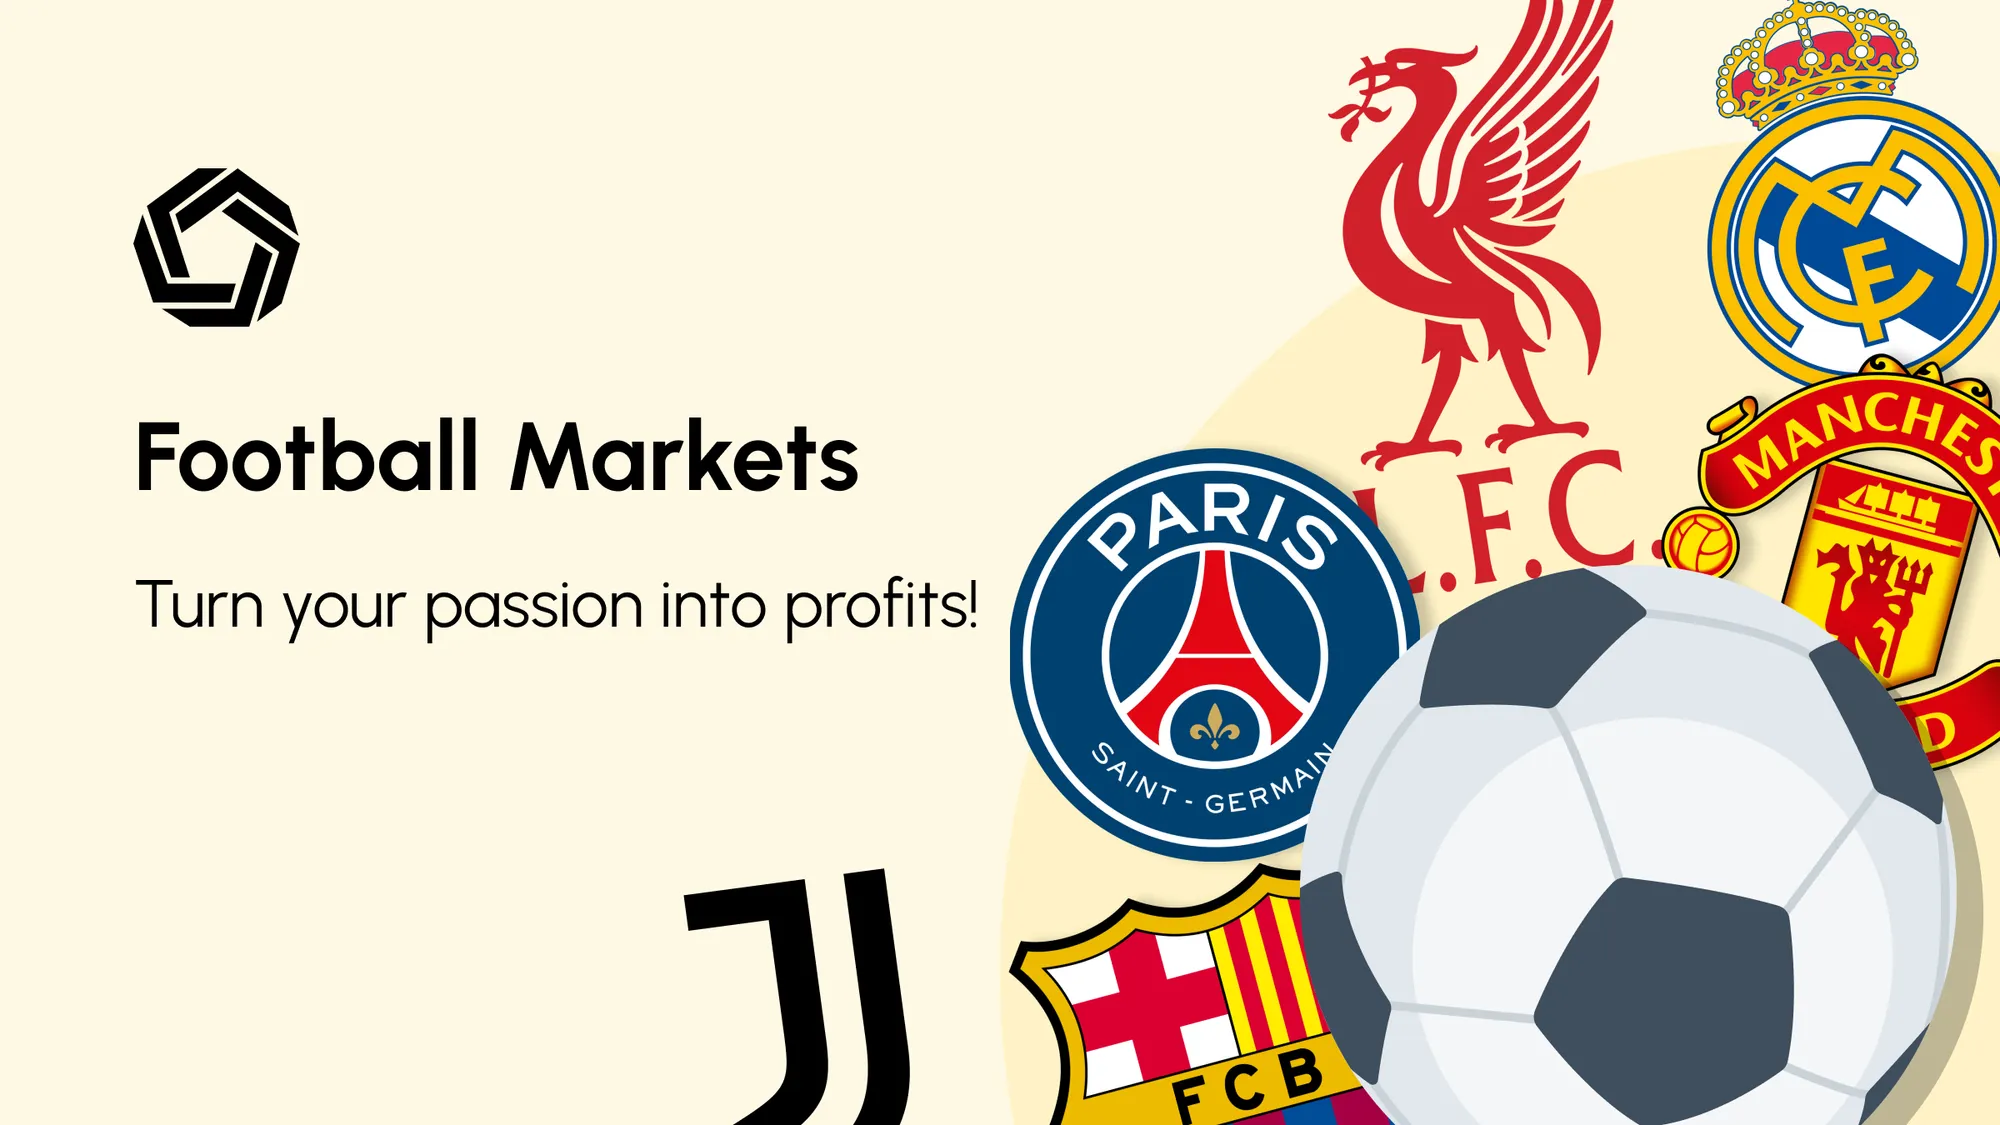 Morpher introduces the Football Markets